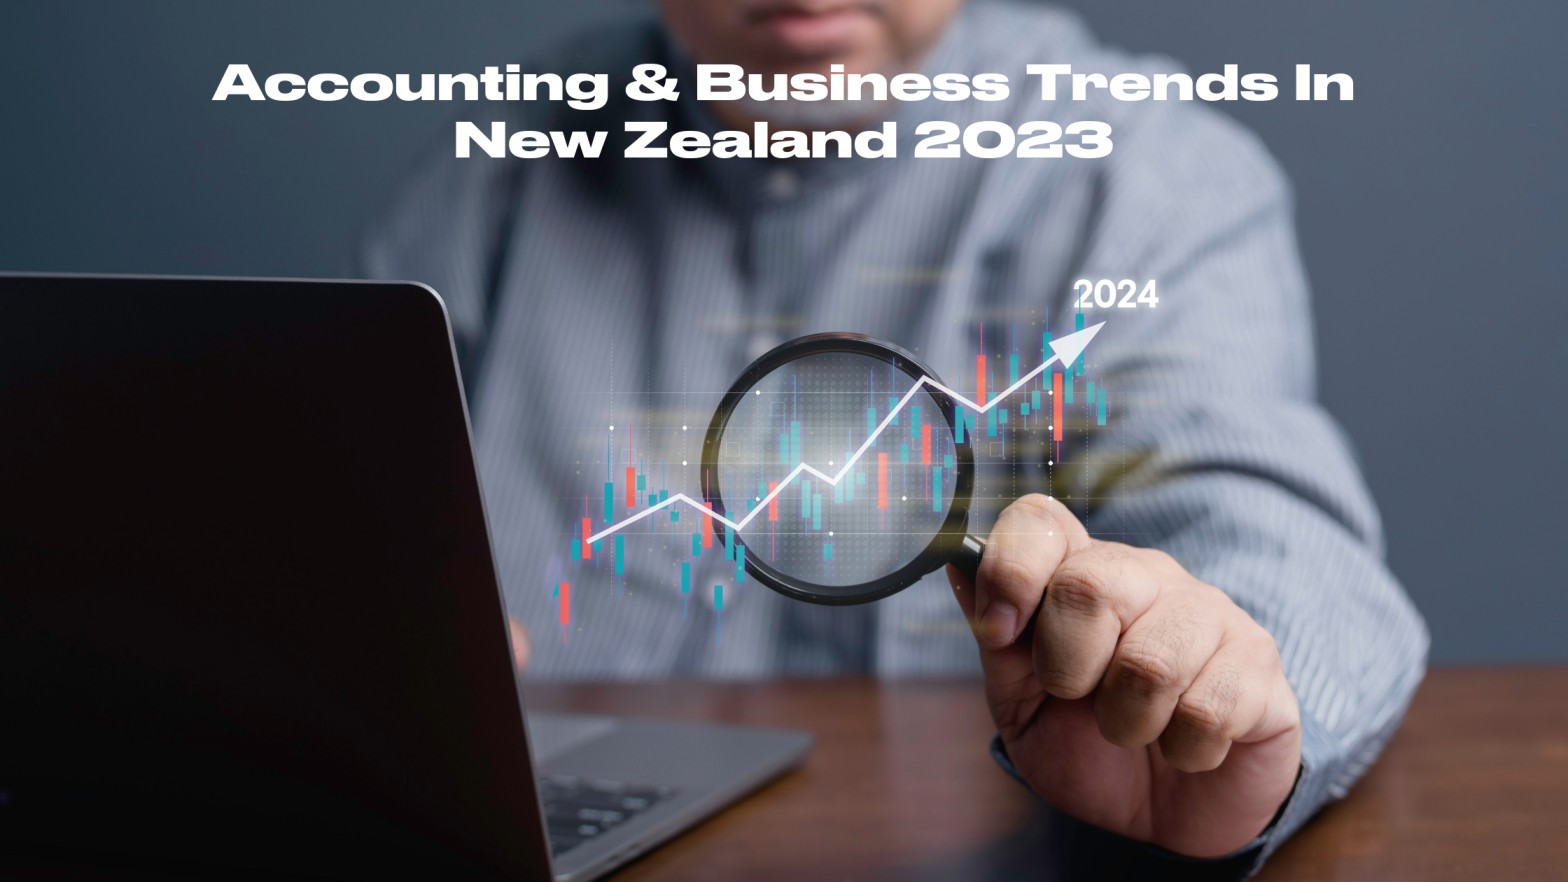 Graph illustrating Accounting and Business Trends in New Zealand for 2023